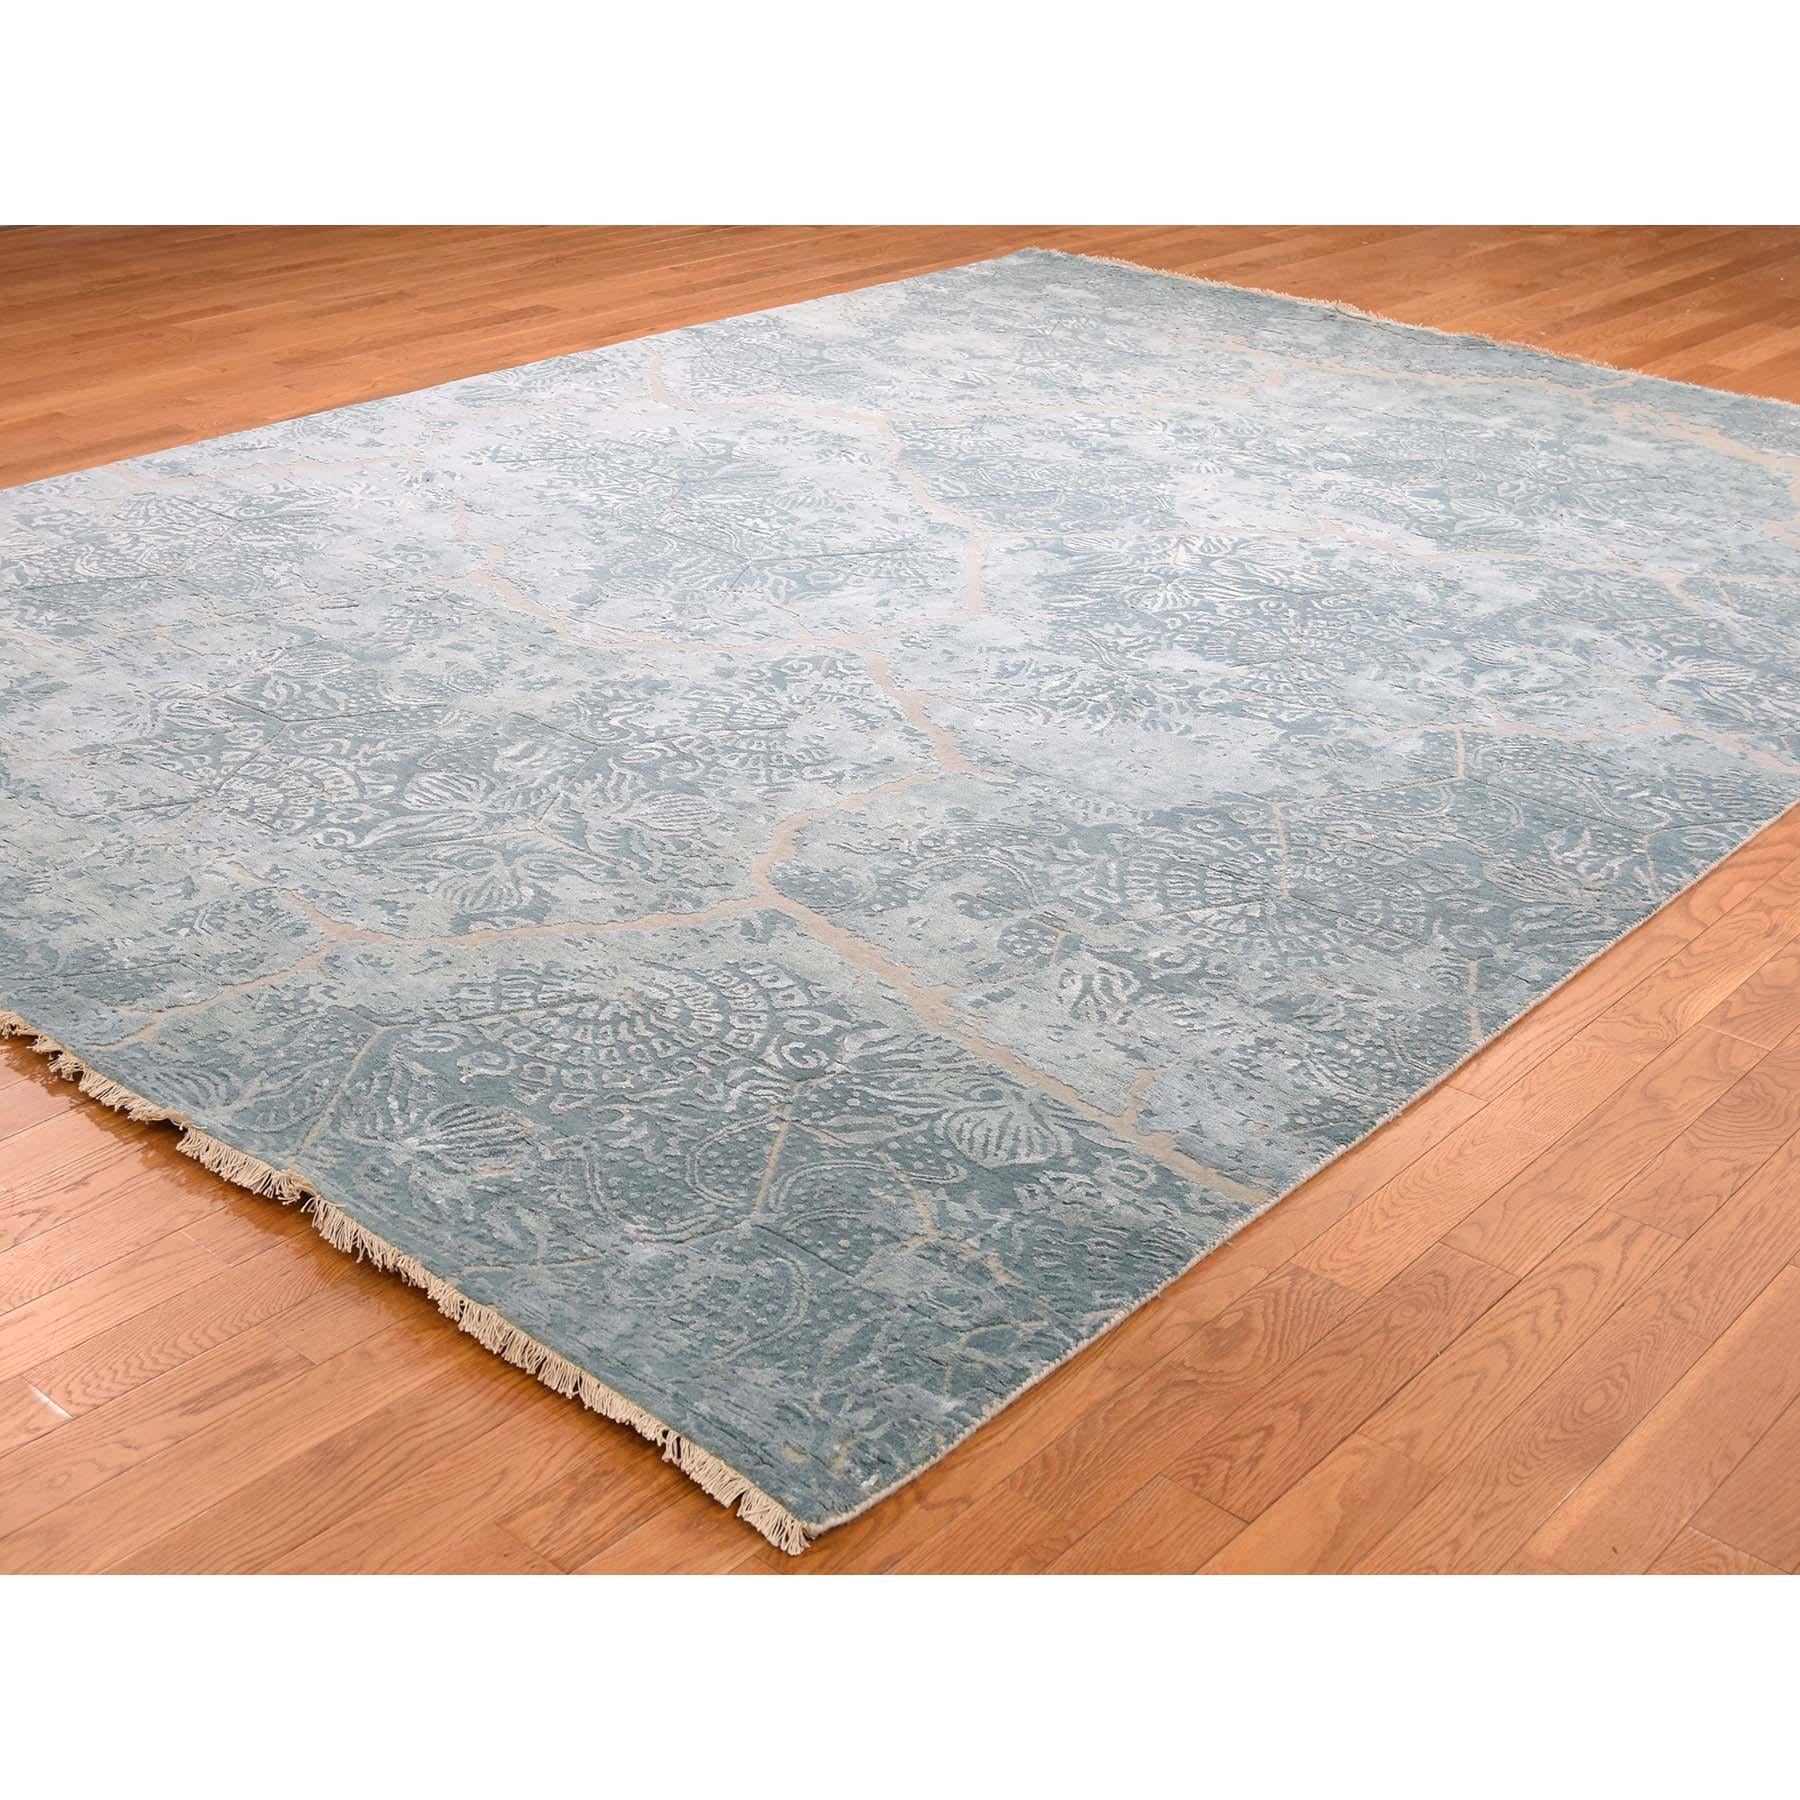 Afghan Wool and Silk Hi-Low Pile Hand Knotted Oriental Rug